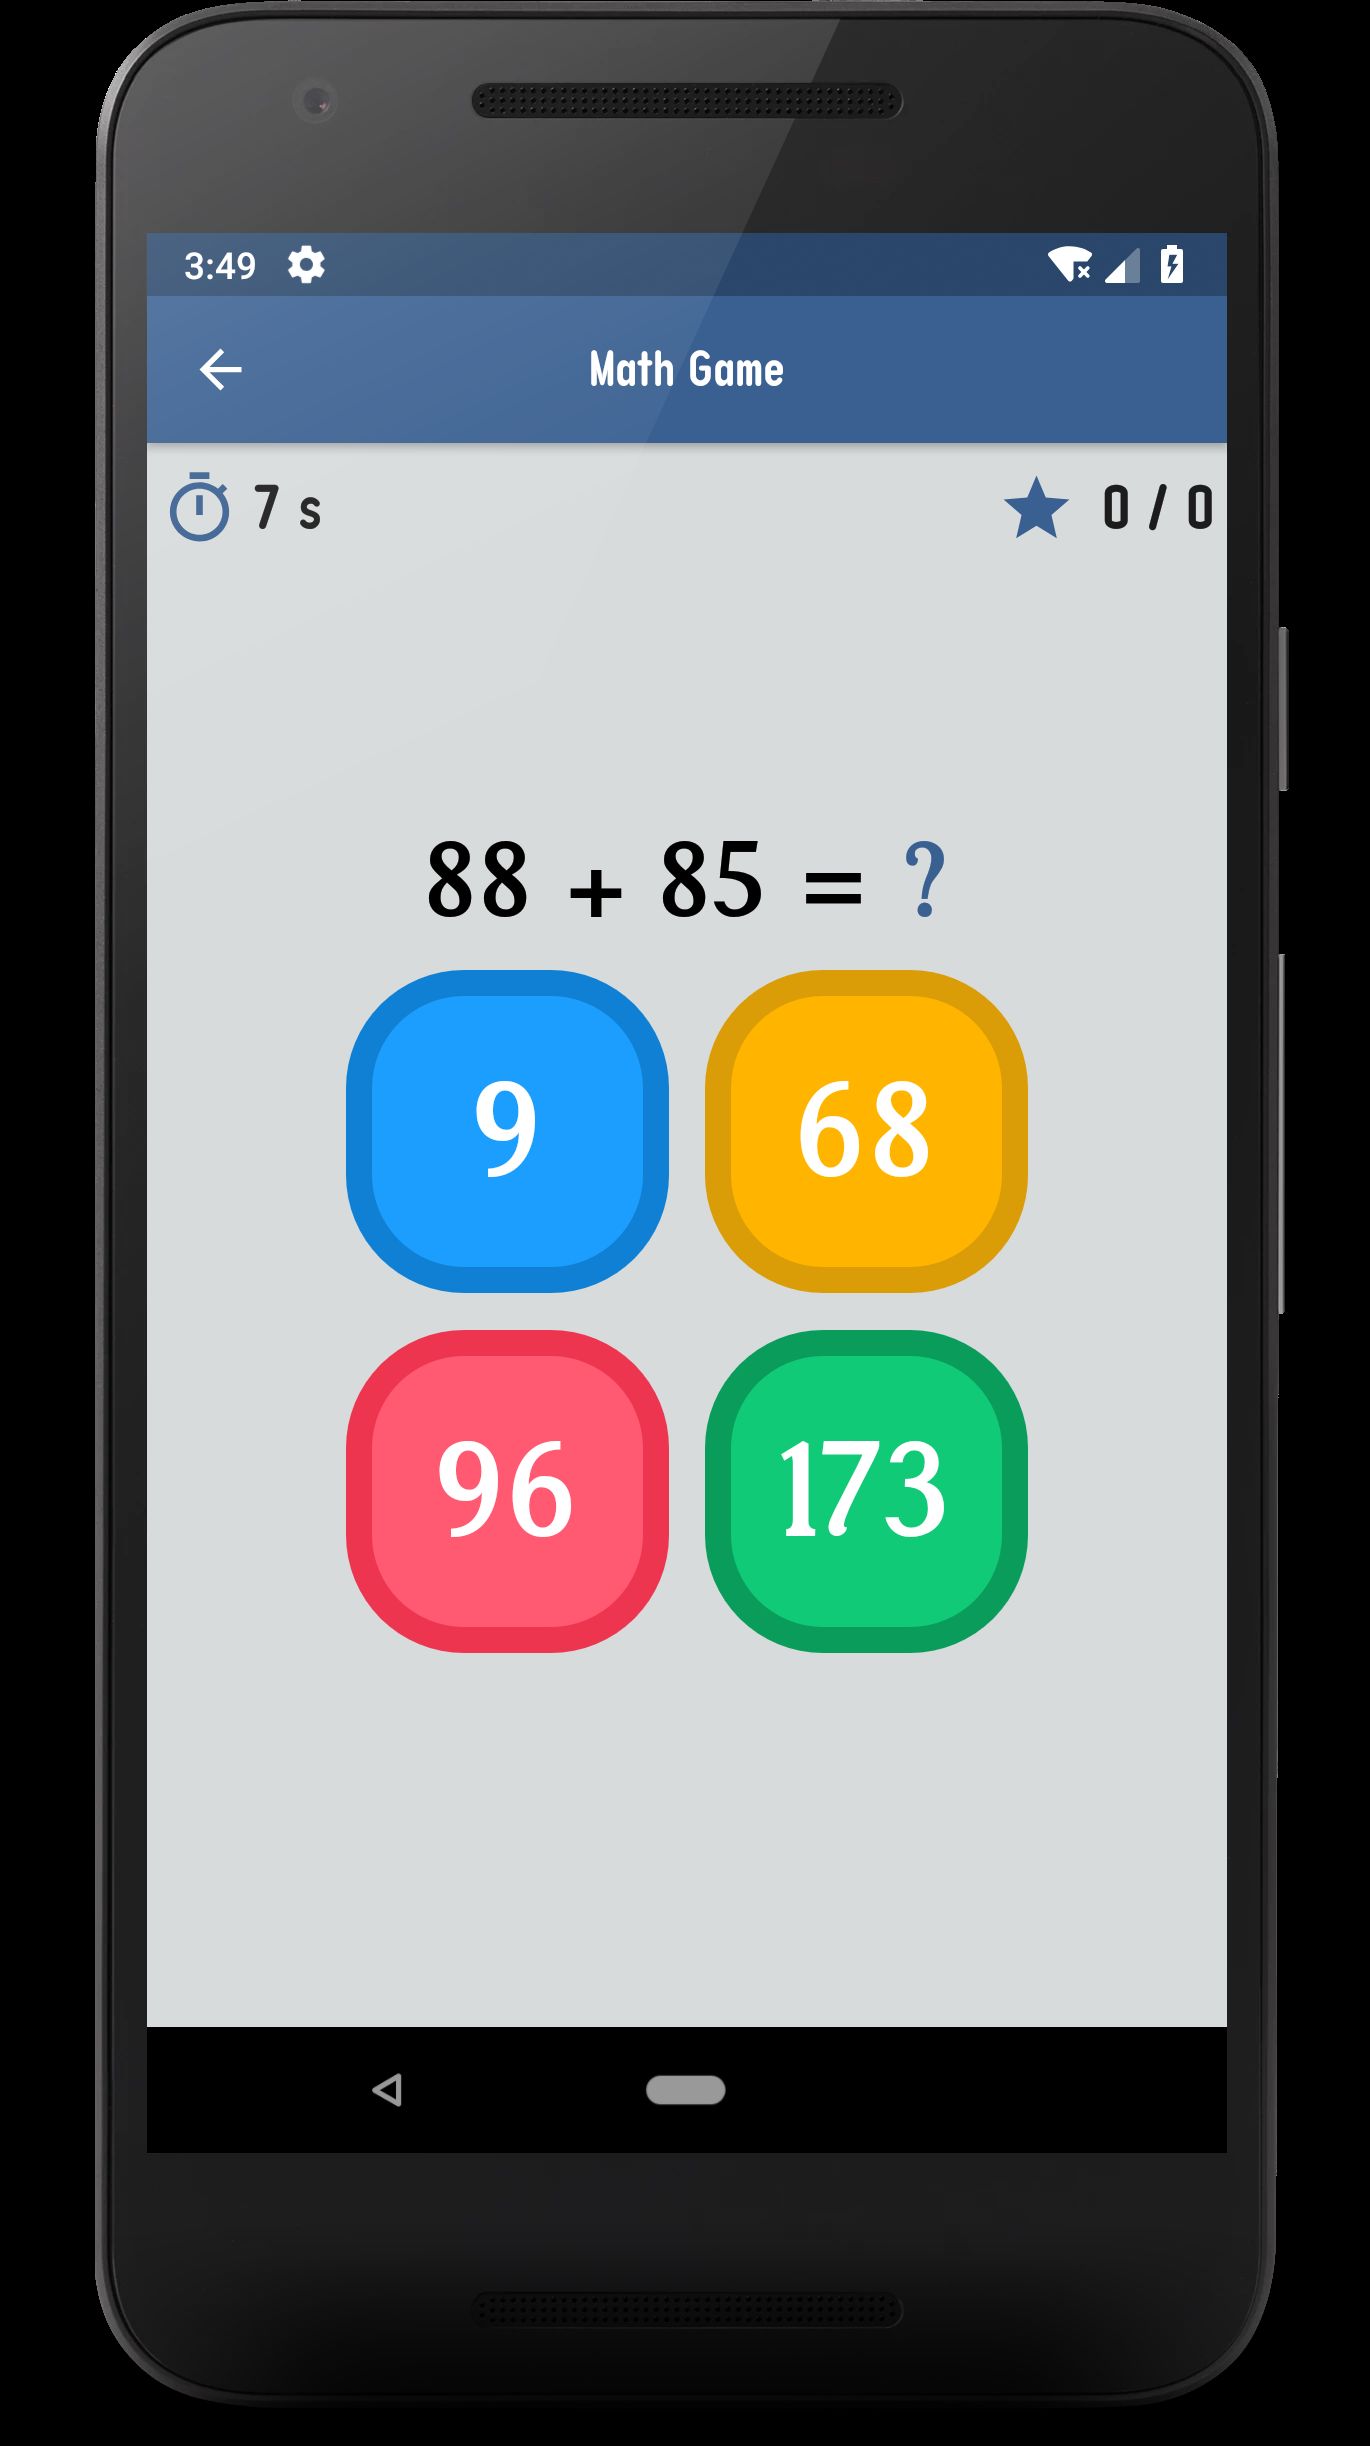 Maths Games - Android App Source Code by Victorytemplate | Codester